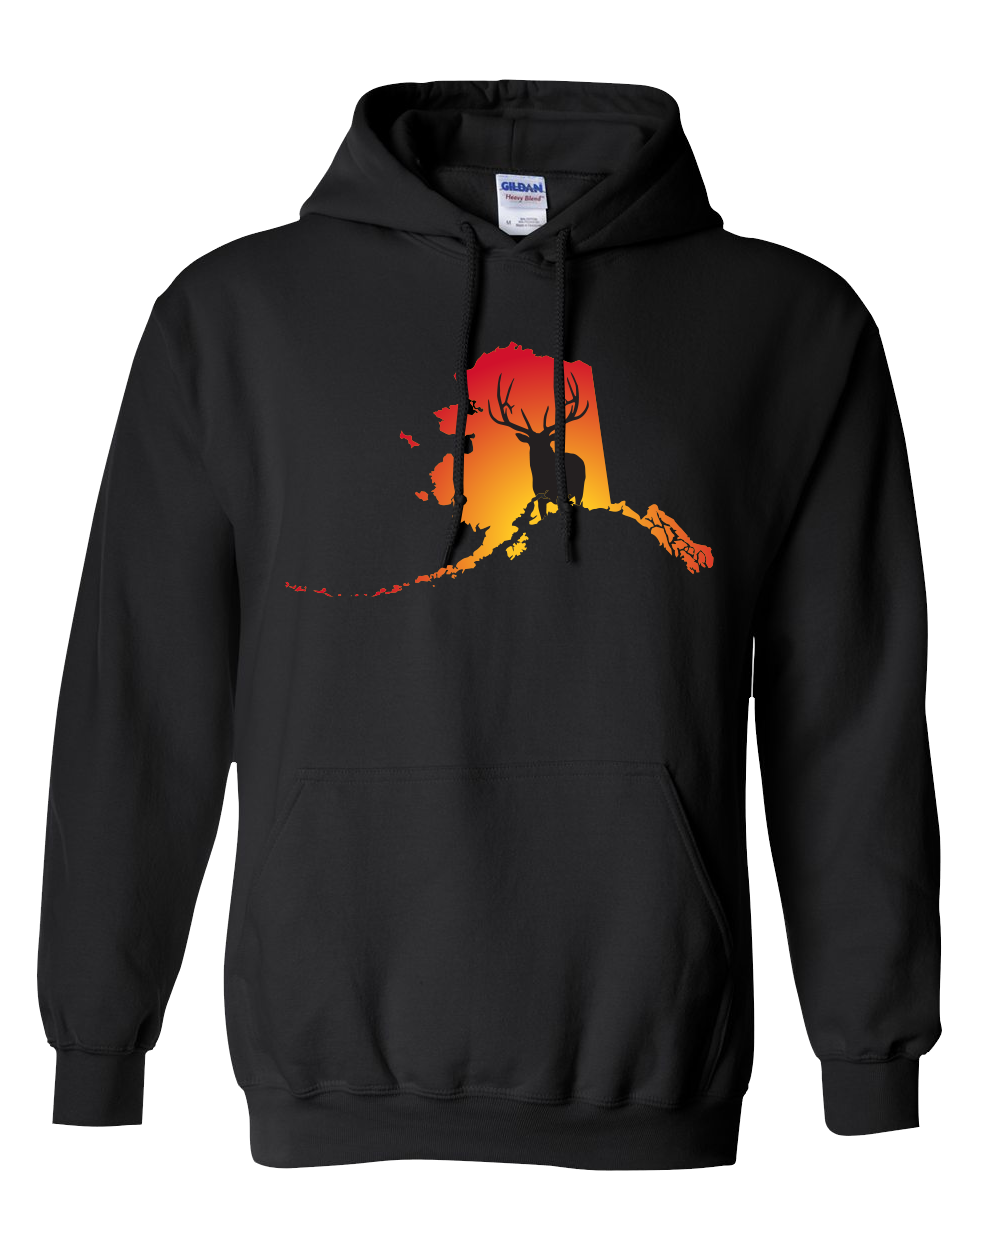 Pullover Hooded Sweatshirt Alaska Black Elk Vibrant Design High Quality Tight Knit Ring Spun Low Maintenance Cotton Printed With The Newest Available Color Transfer Technology